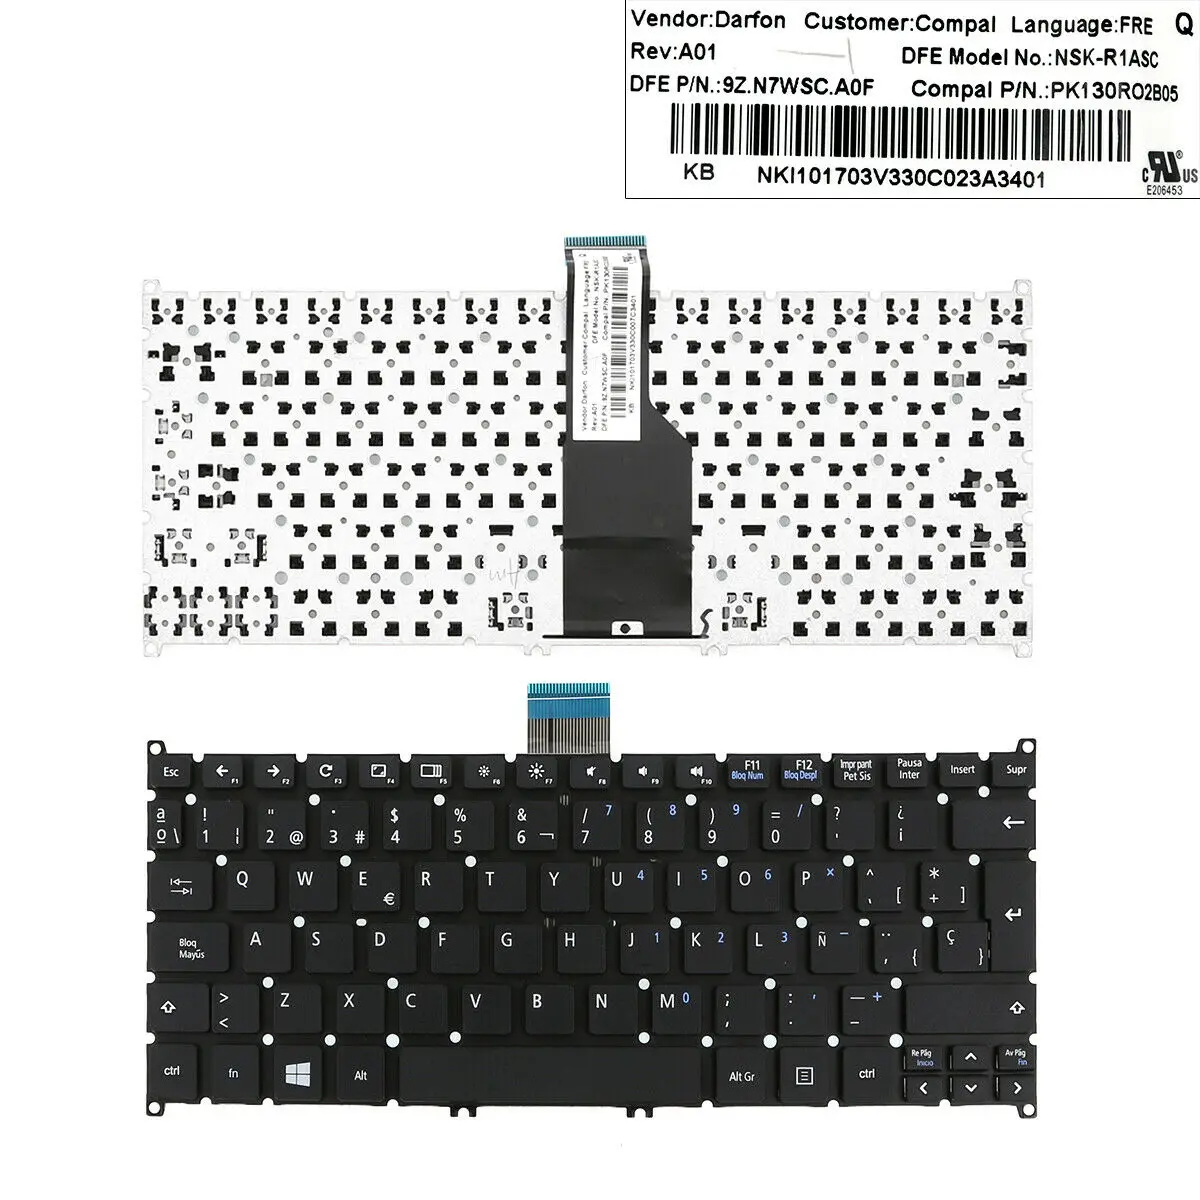 

NEW Spanish SP Laptop Keyboard For Acer Aspire S3 S3-331 S3-391 S3-951 S3-371 S5 S5-391 S5-951 MS2346 MS2377 Q1VZC